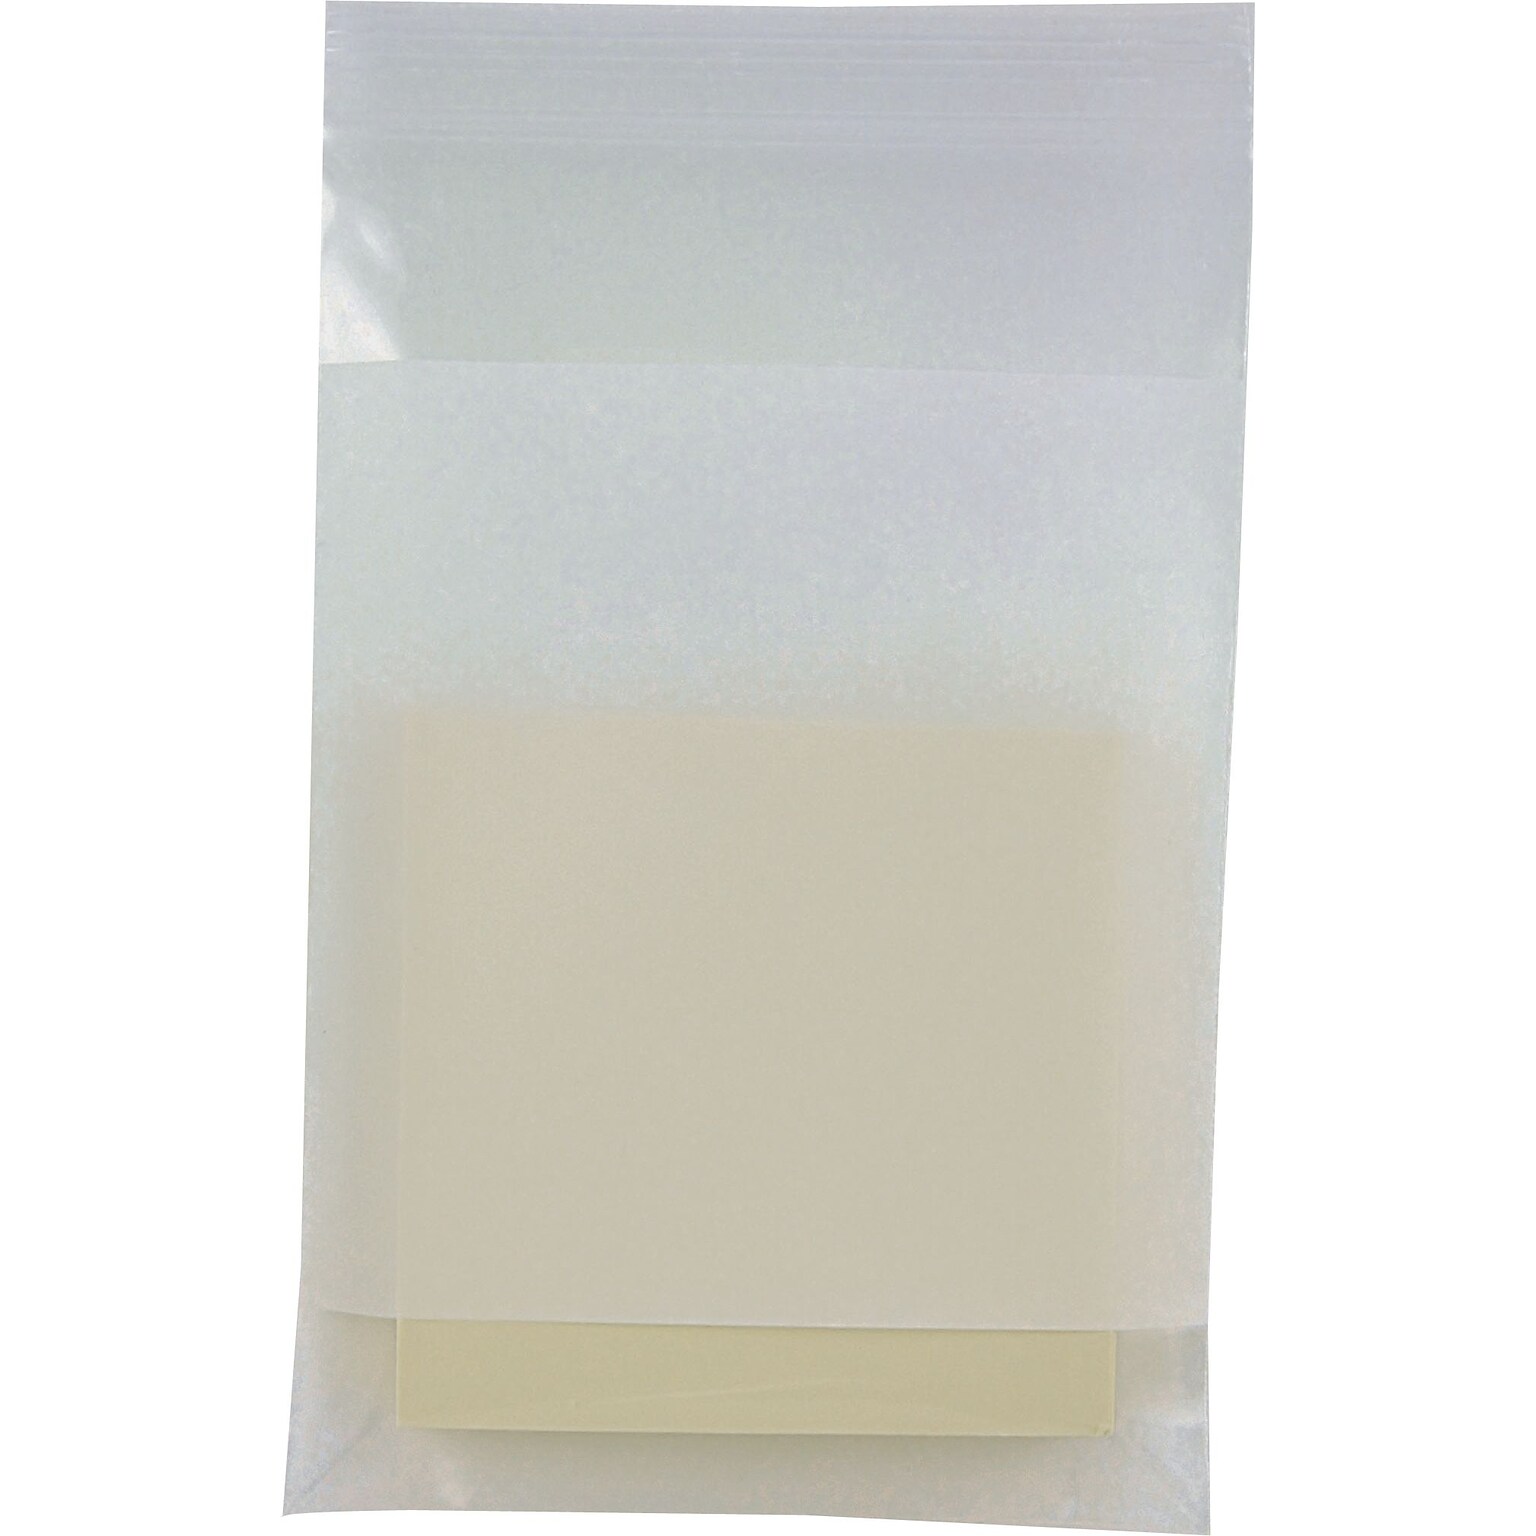 4 x 6 Reclosable Poly Bags, 4 Mil, Clear, 1000/Carton (3990A)